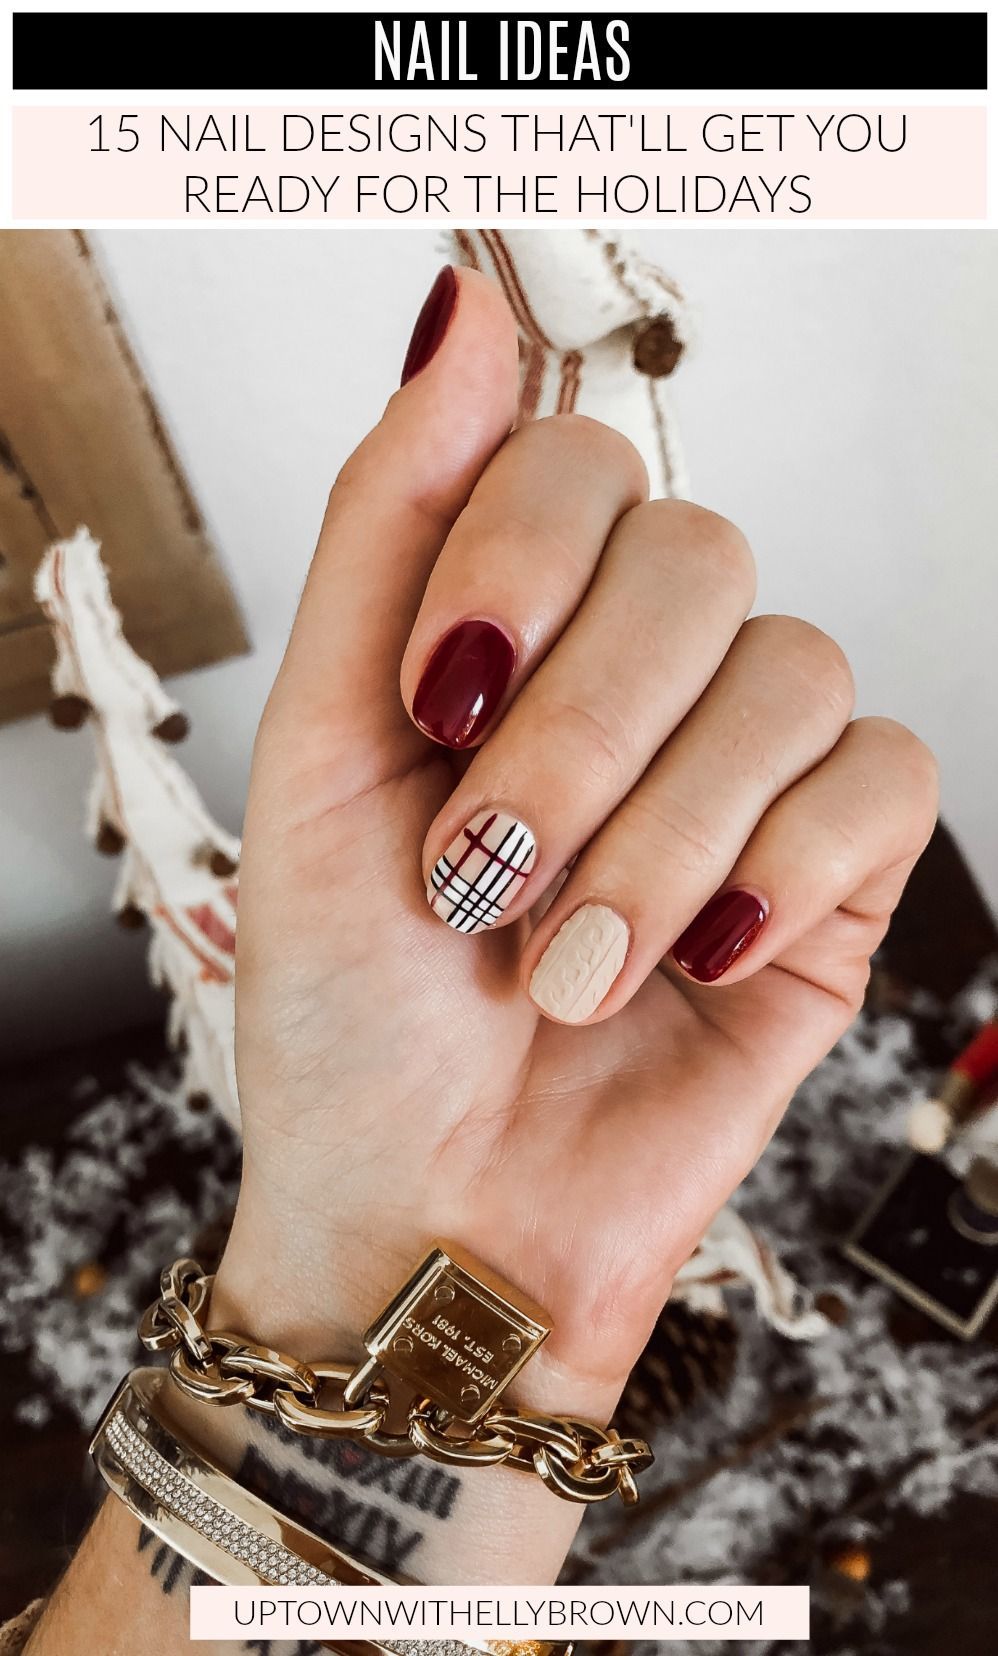 15 Holiday Nails to Try! -   12 holiday Nails plaid ideas